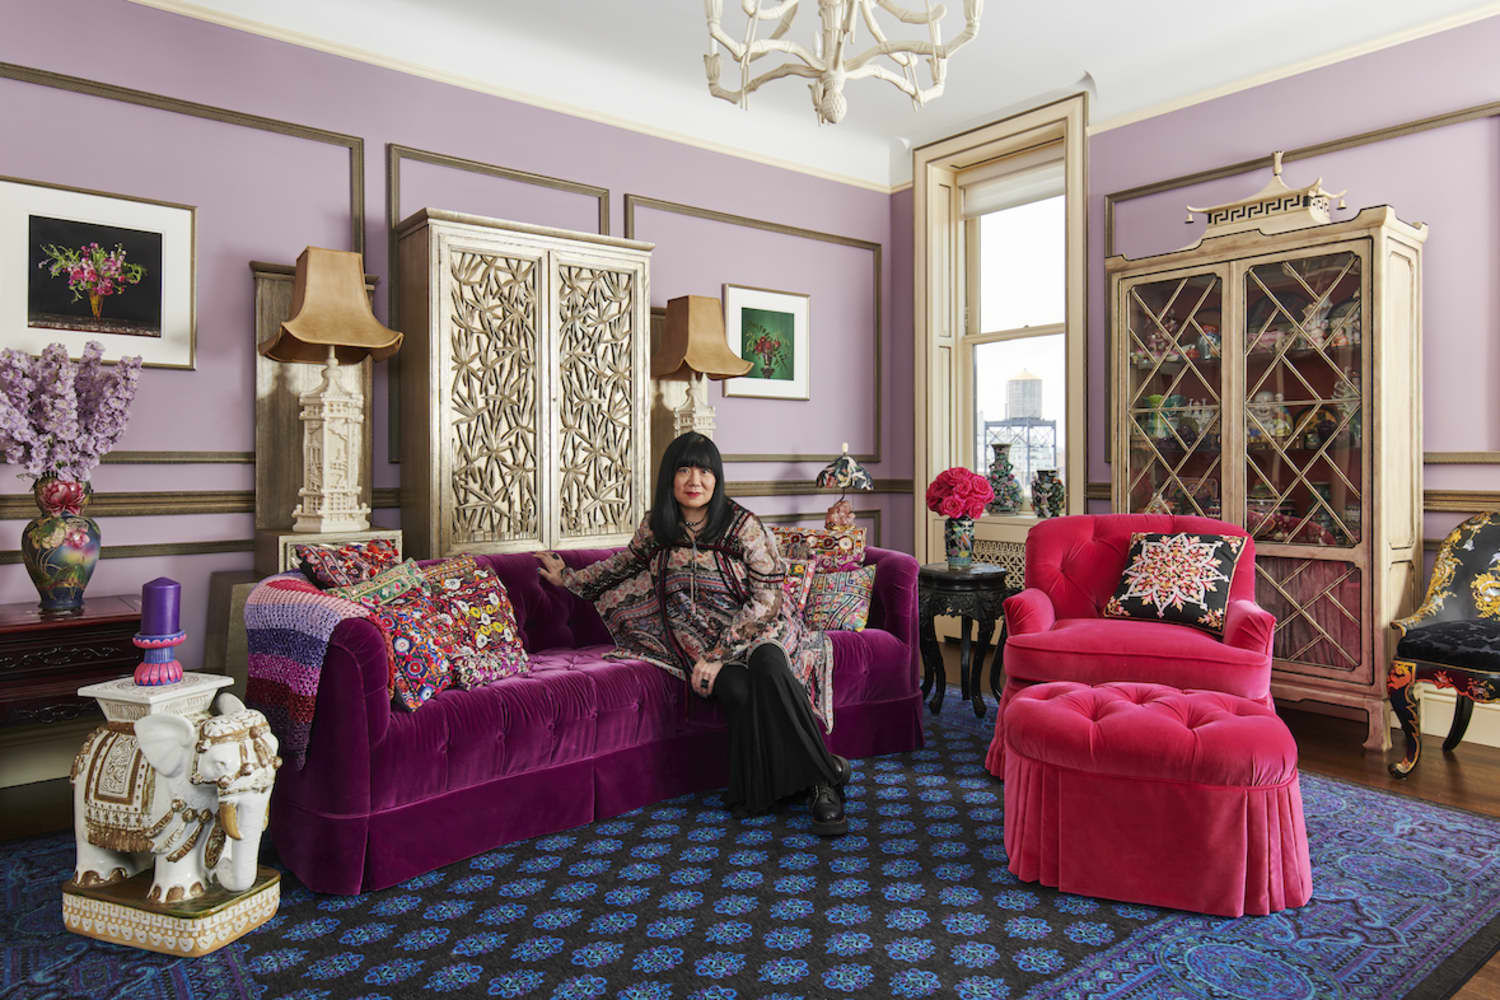 Designer Anna Sui and Ruggable Just Launched a Stylish Rug